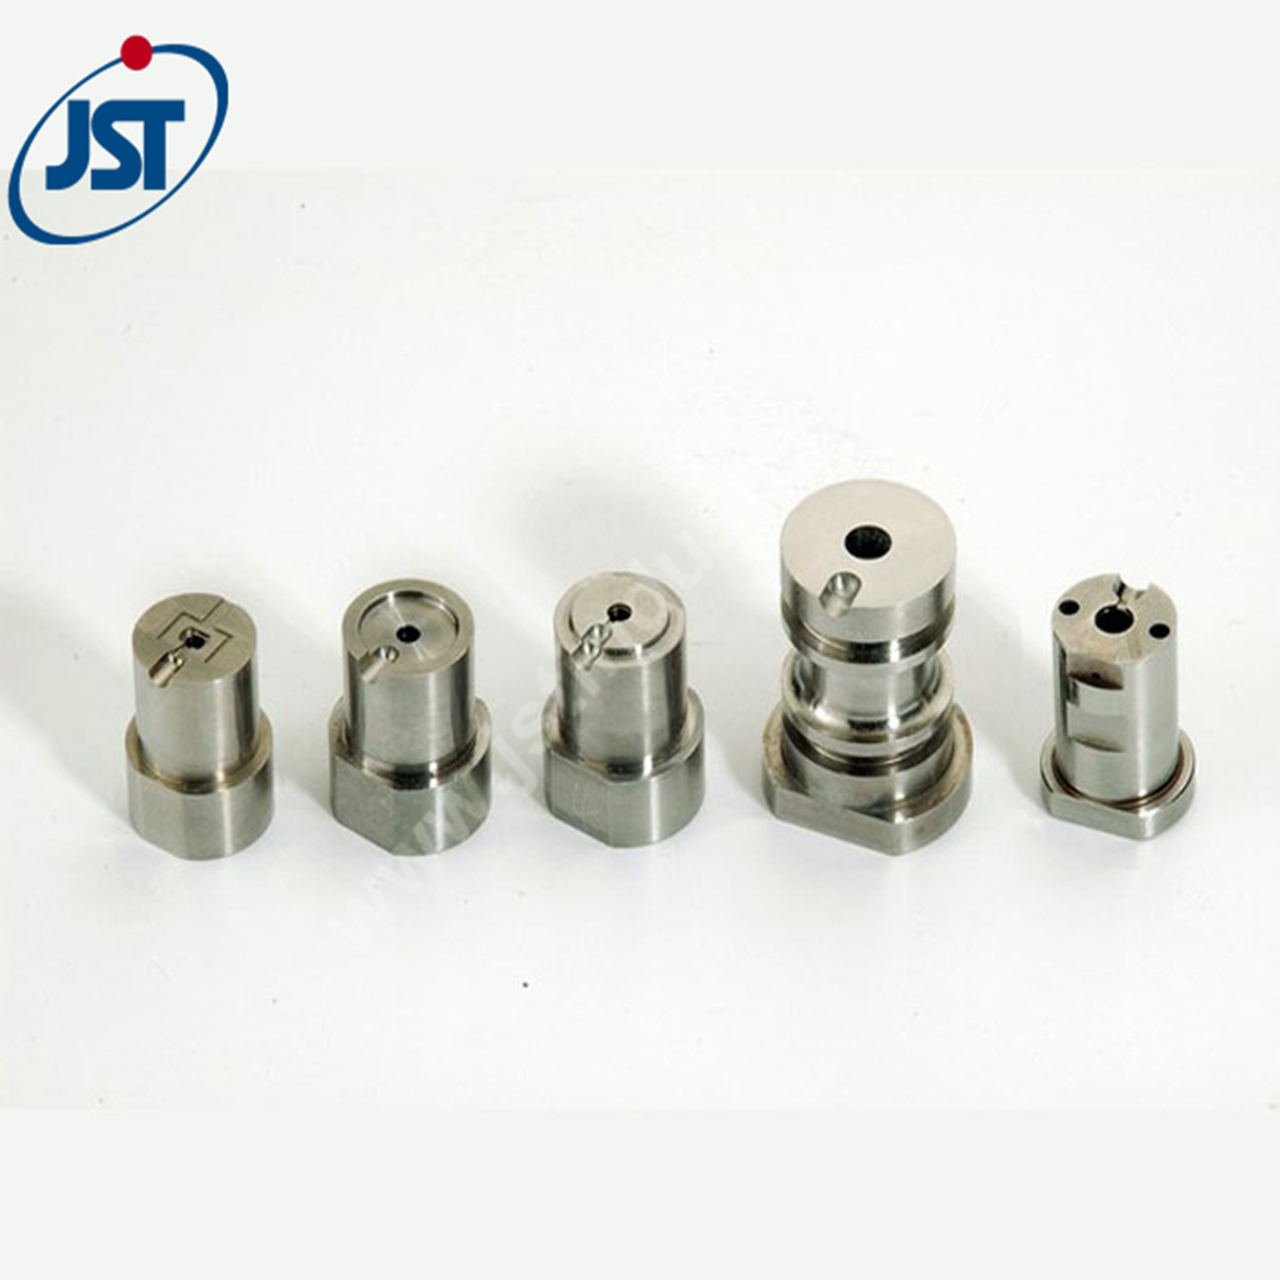 Custom CNC Turning Milling Machining Stainless Steel Parts